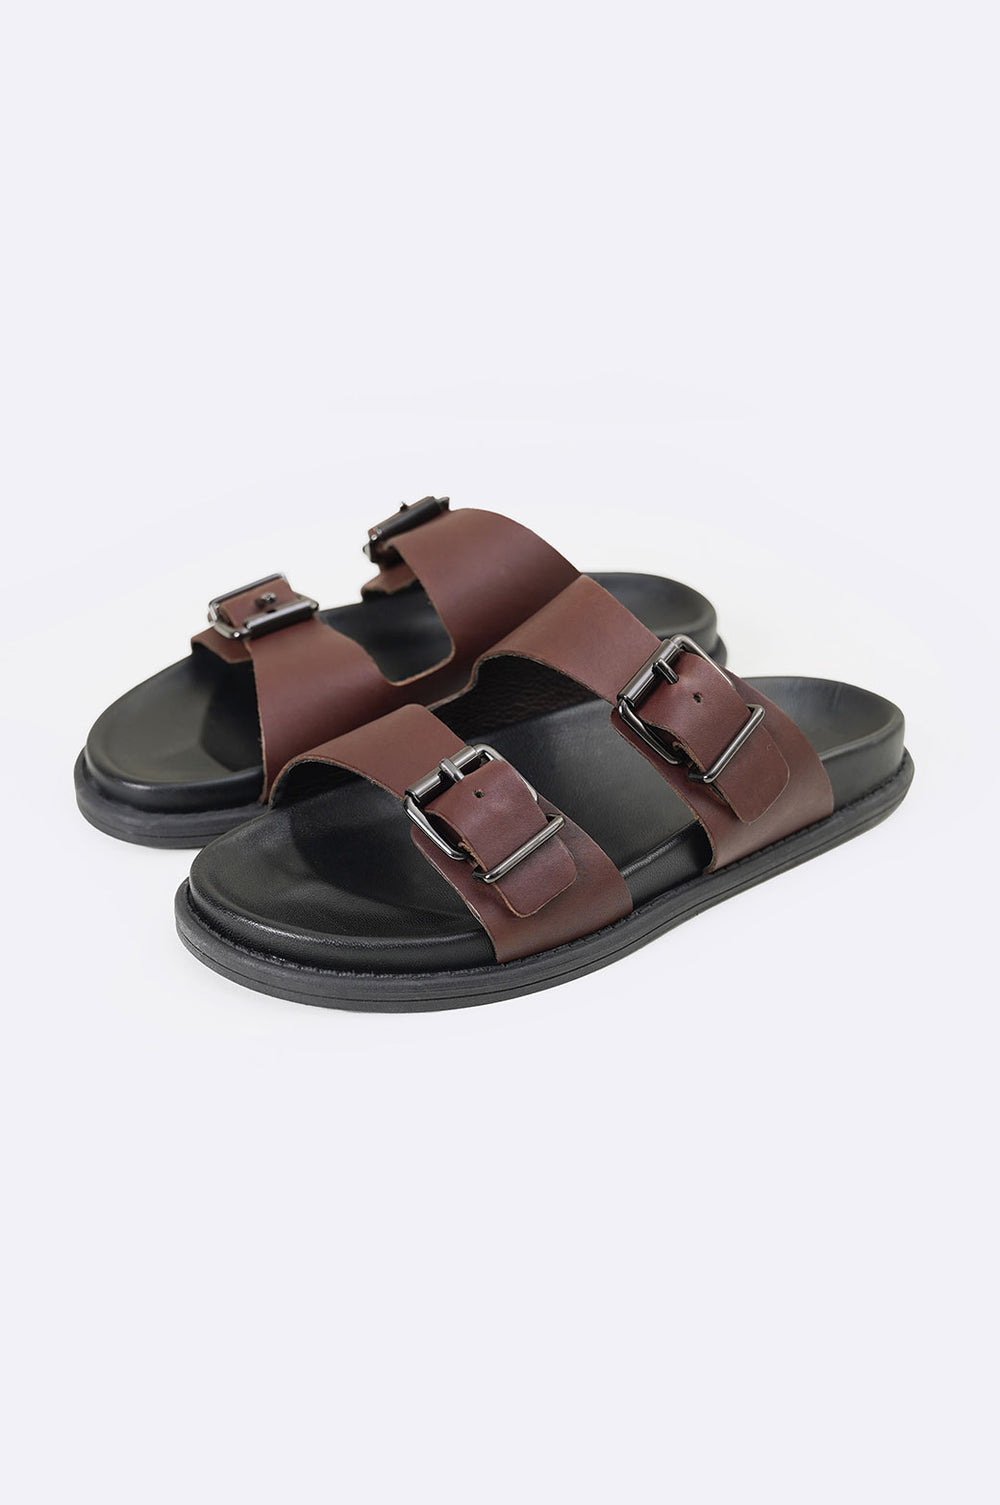 DARK BROWN LEATHER SLIPPERS